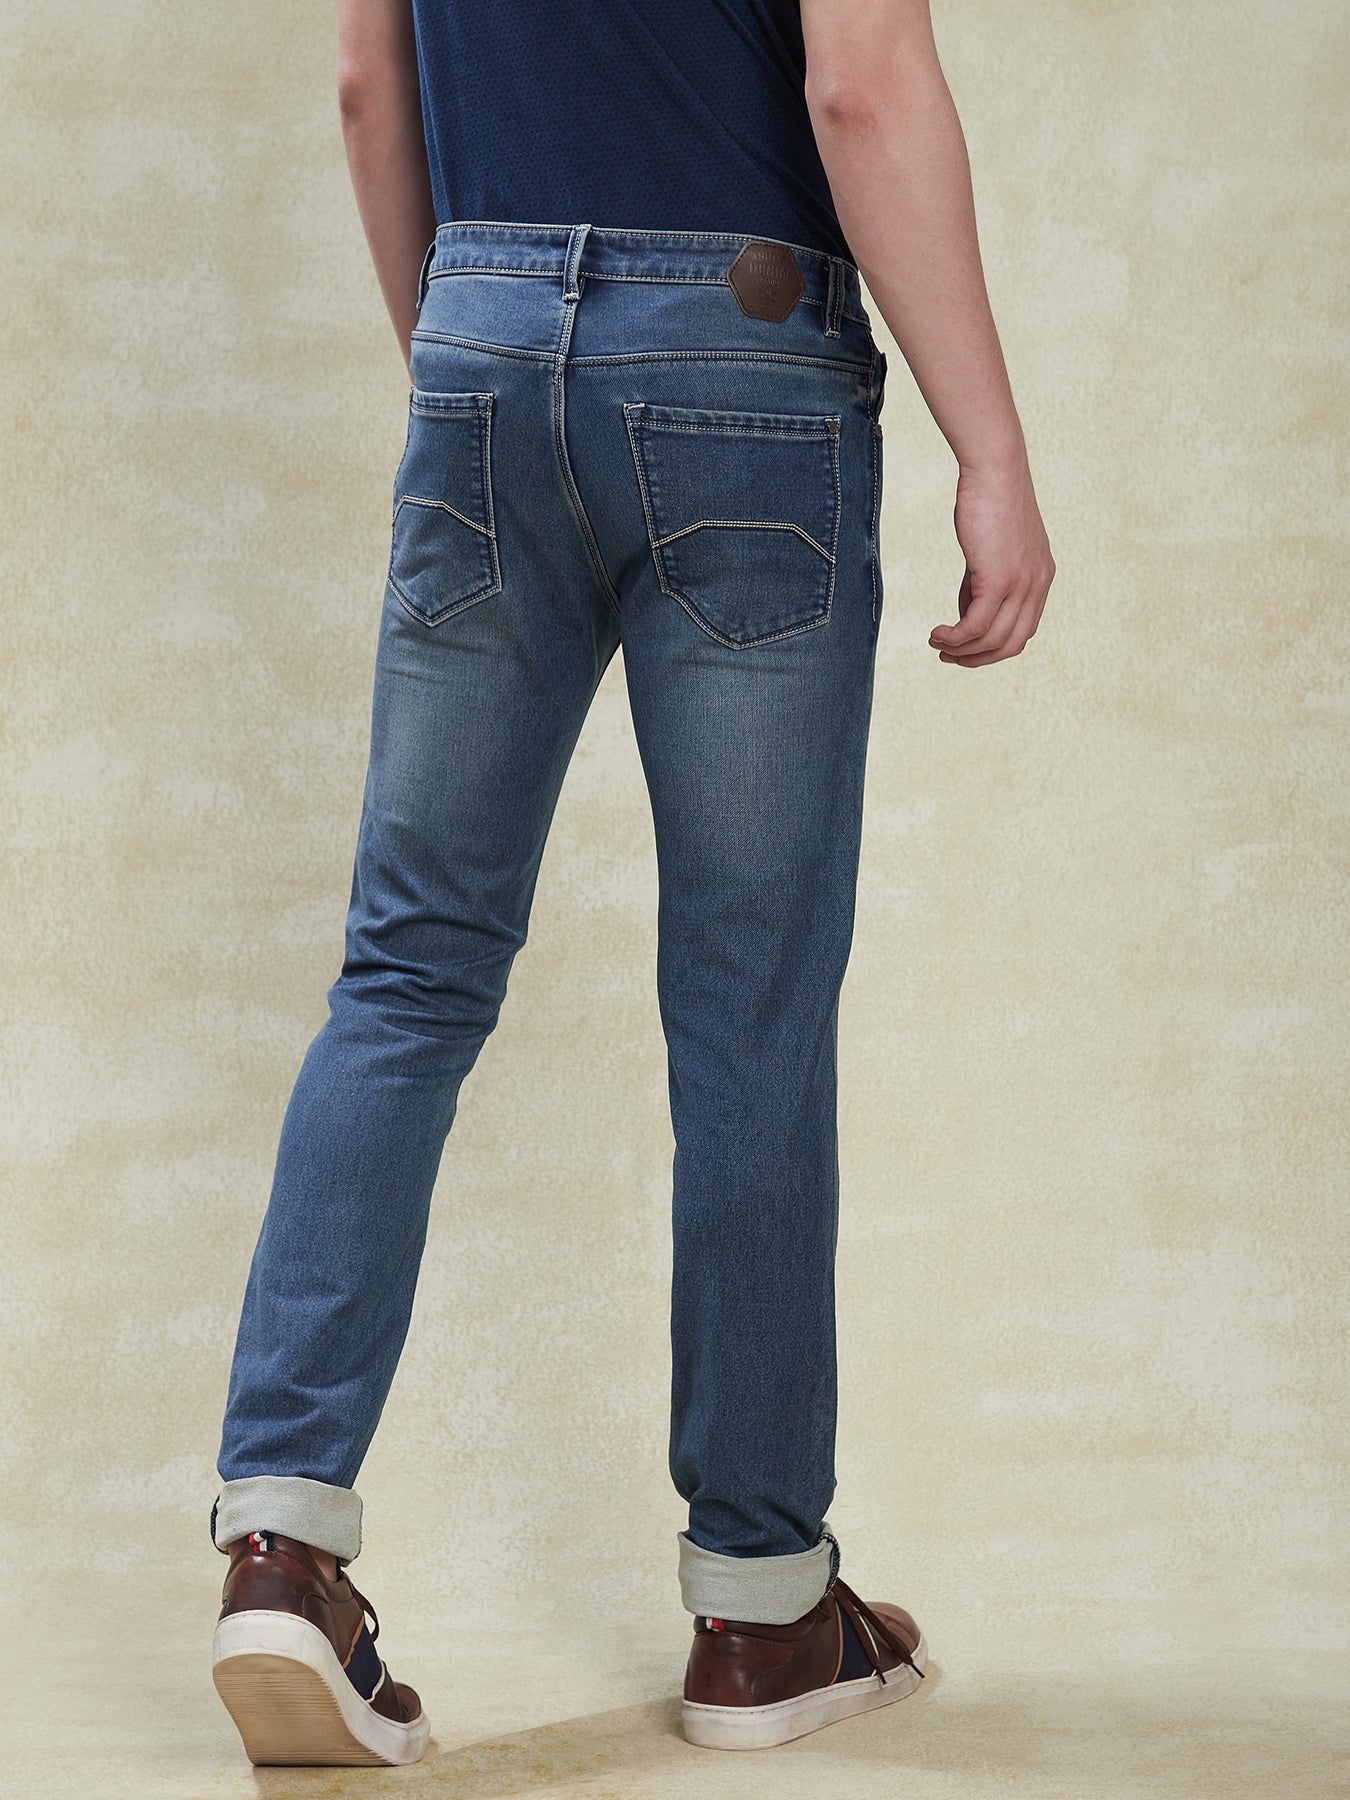 cotton-stretch-blue-narrow-fit-flat-front-casual-mens-jeans